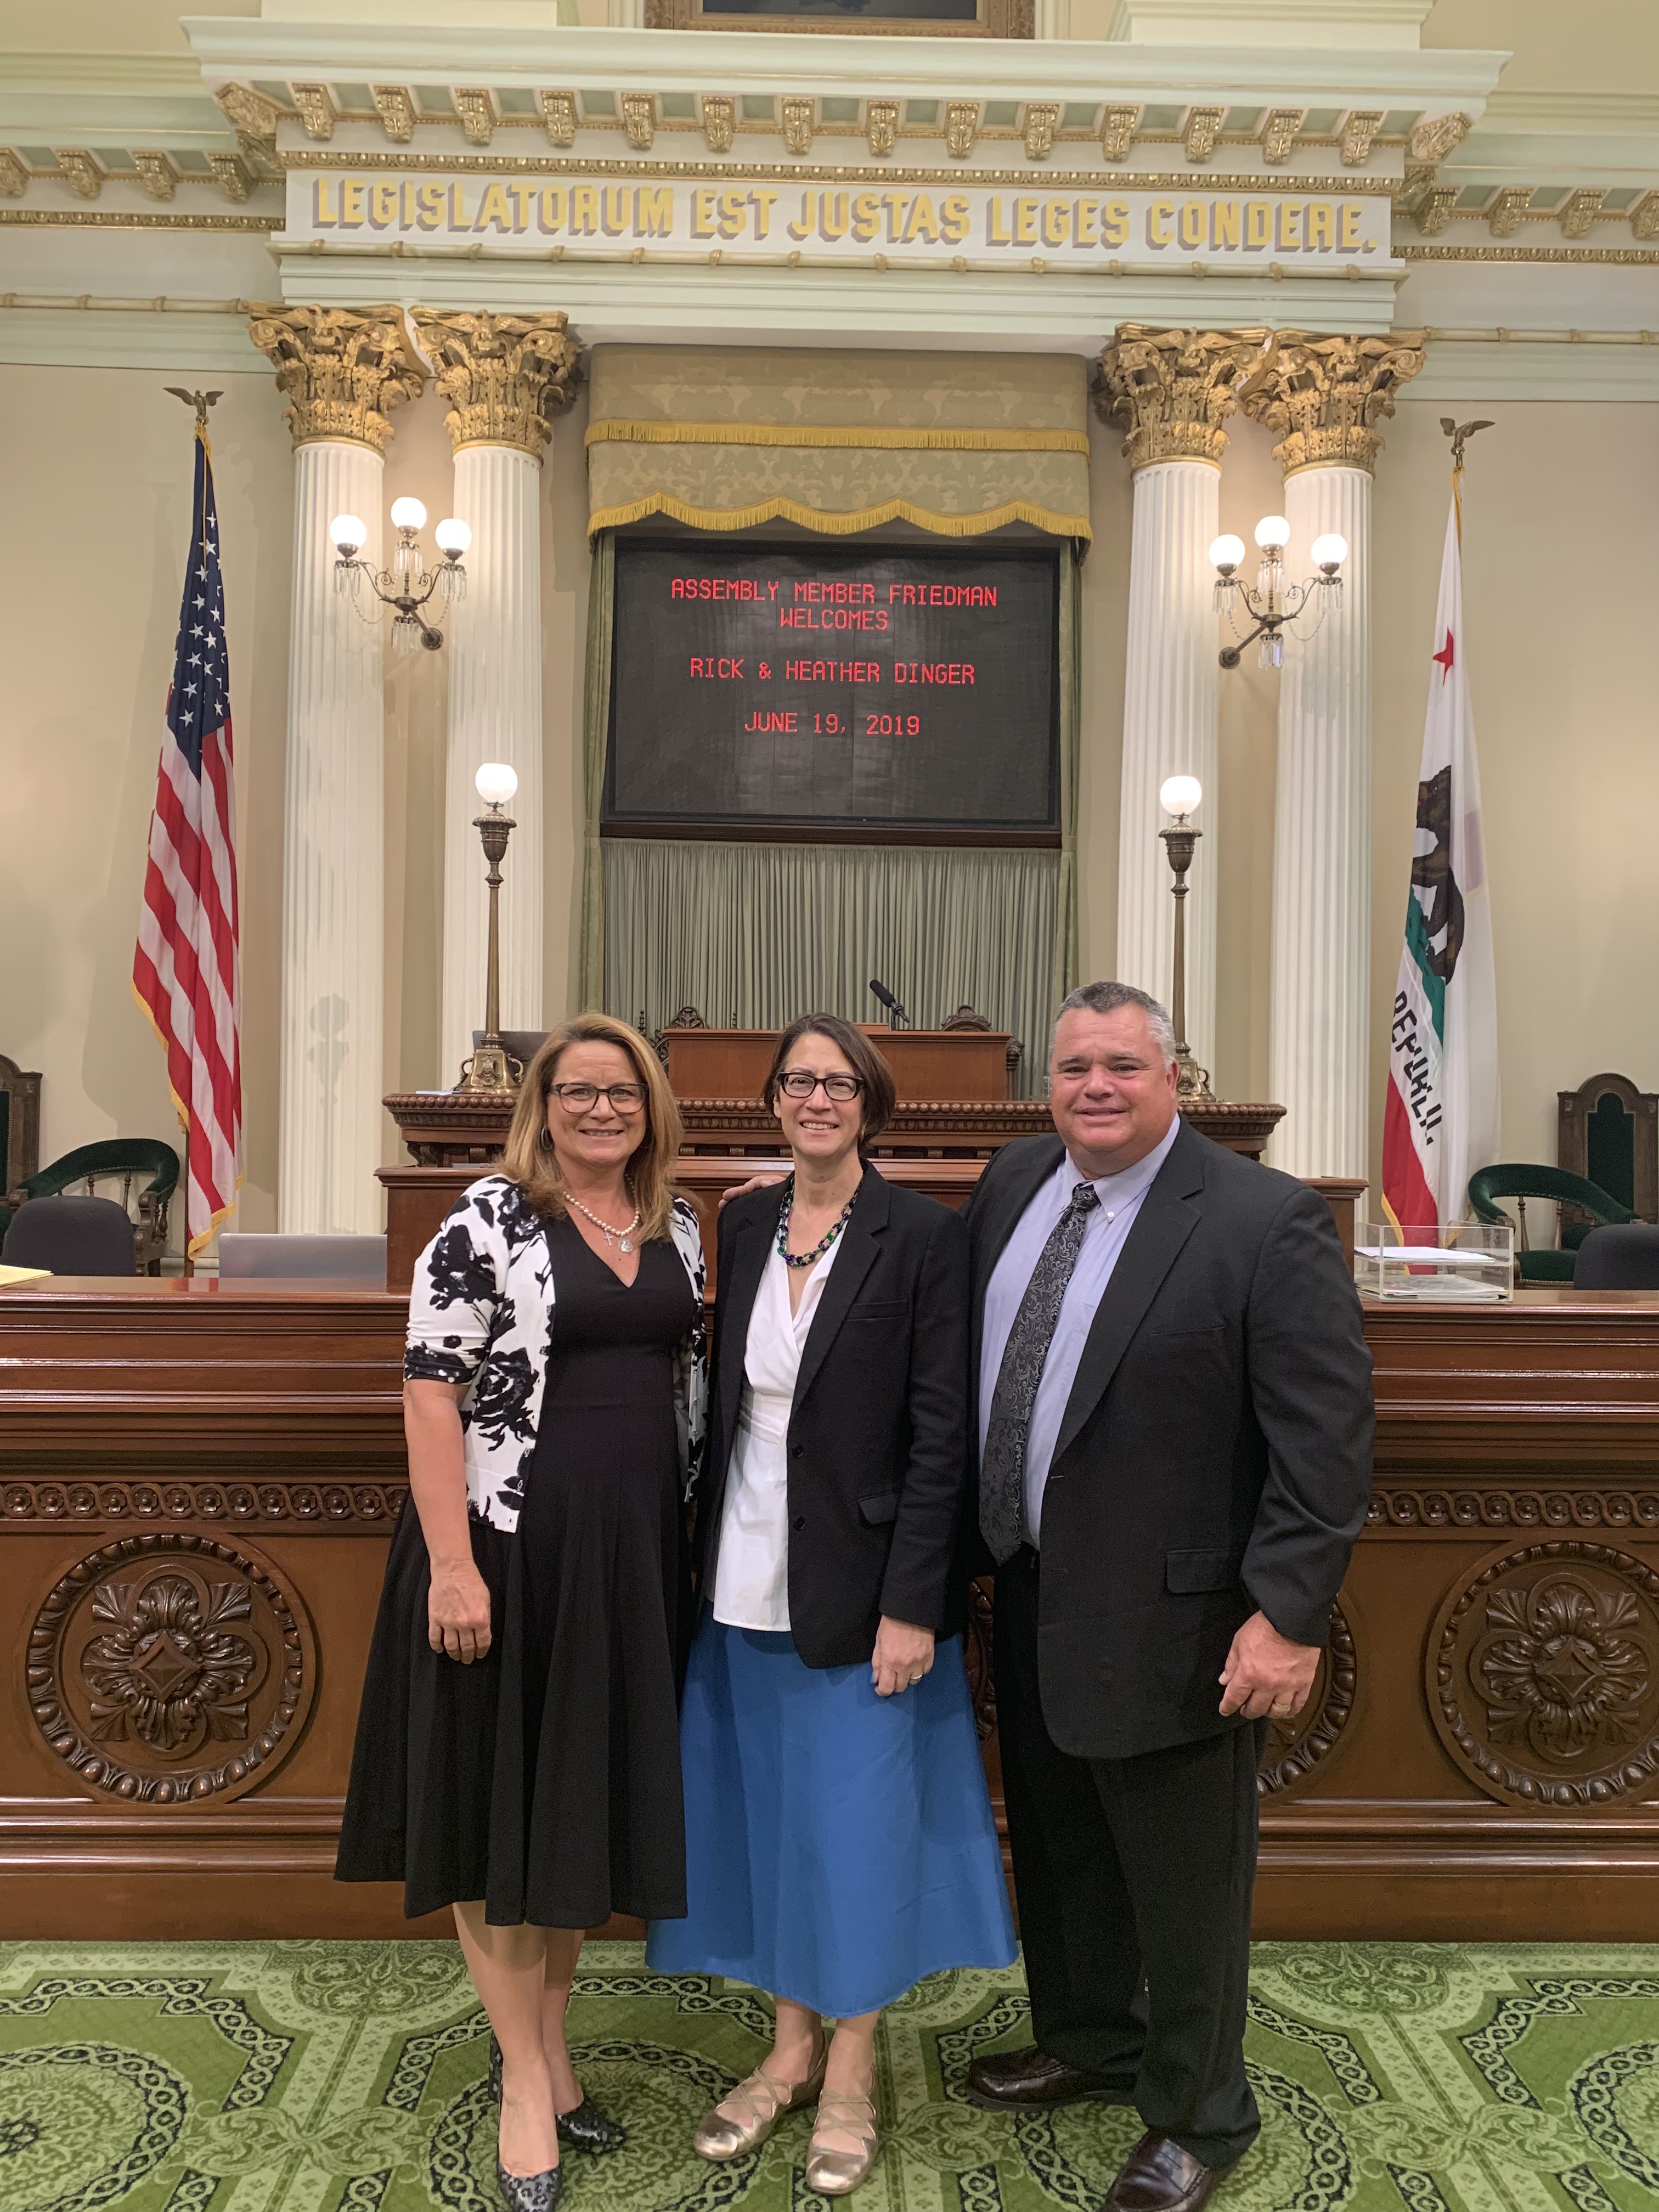 Friedman presents Crescenta Valley Insurance President Rick Dinger, and his wife Heather Dinger, on the Assembly Floor.